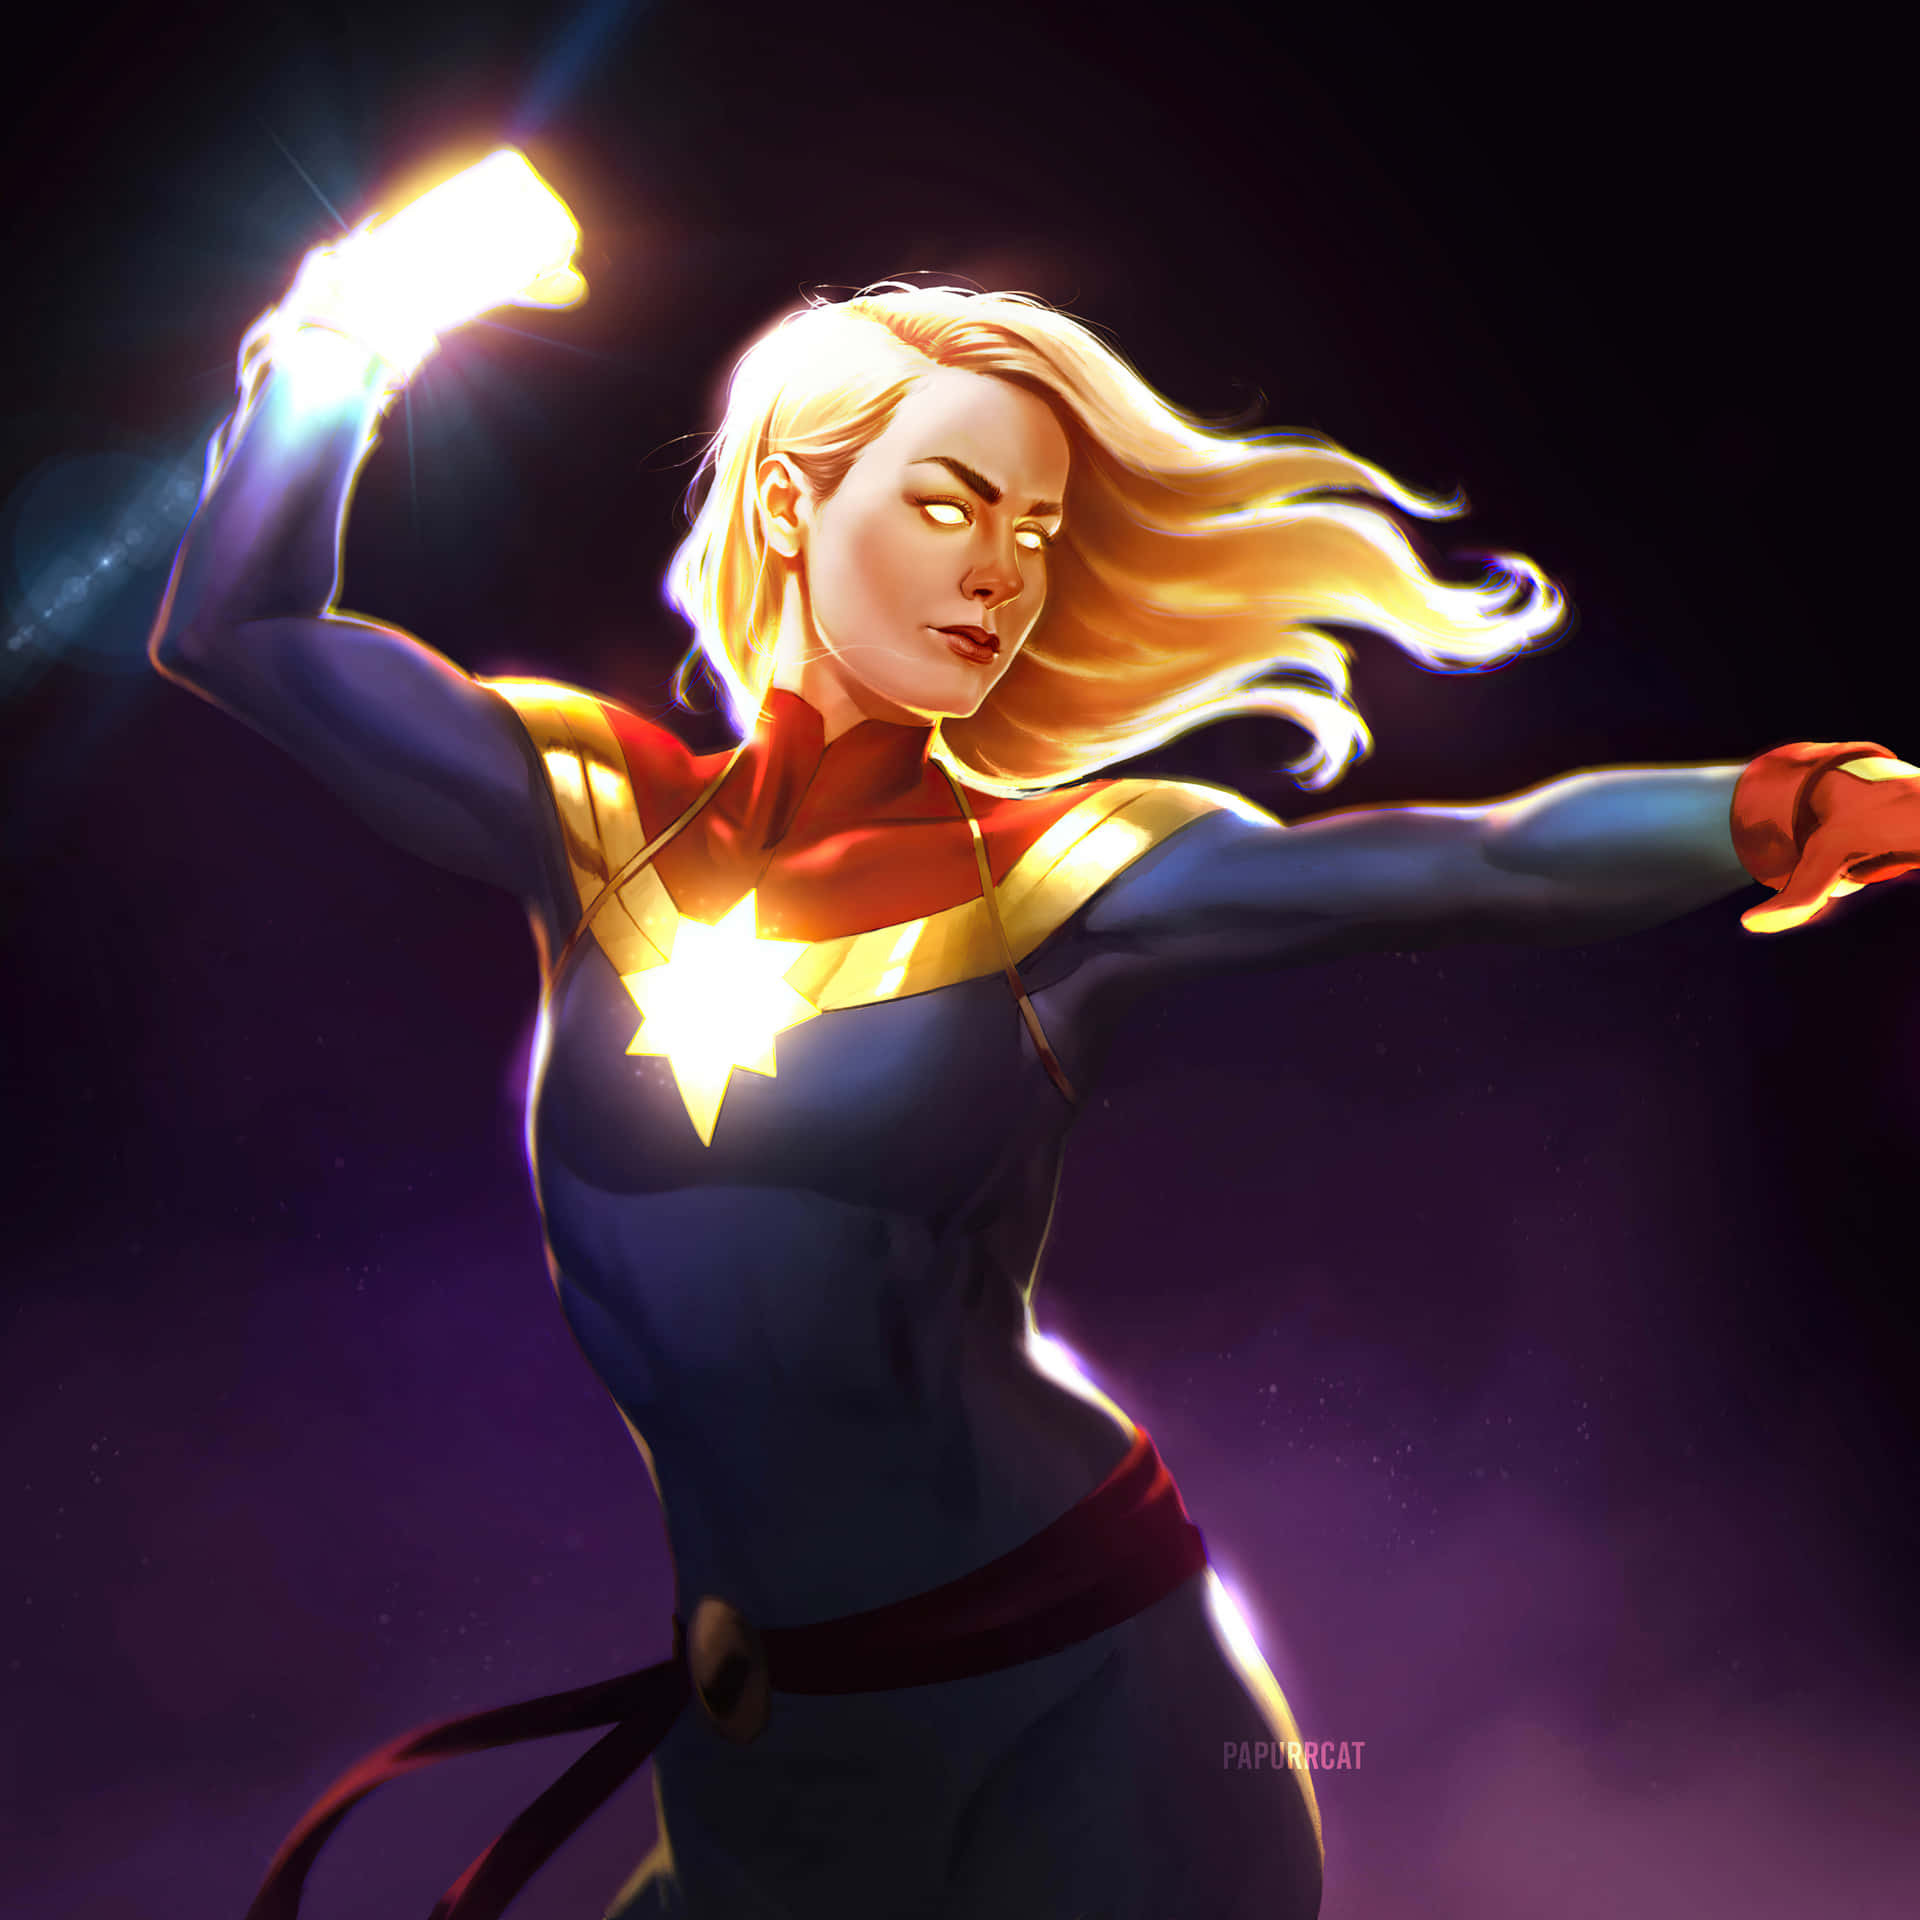 Get the ultimate superhero experience with the new Captain Marvel iPad! Wallpaper